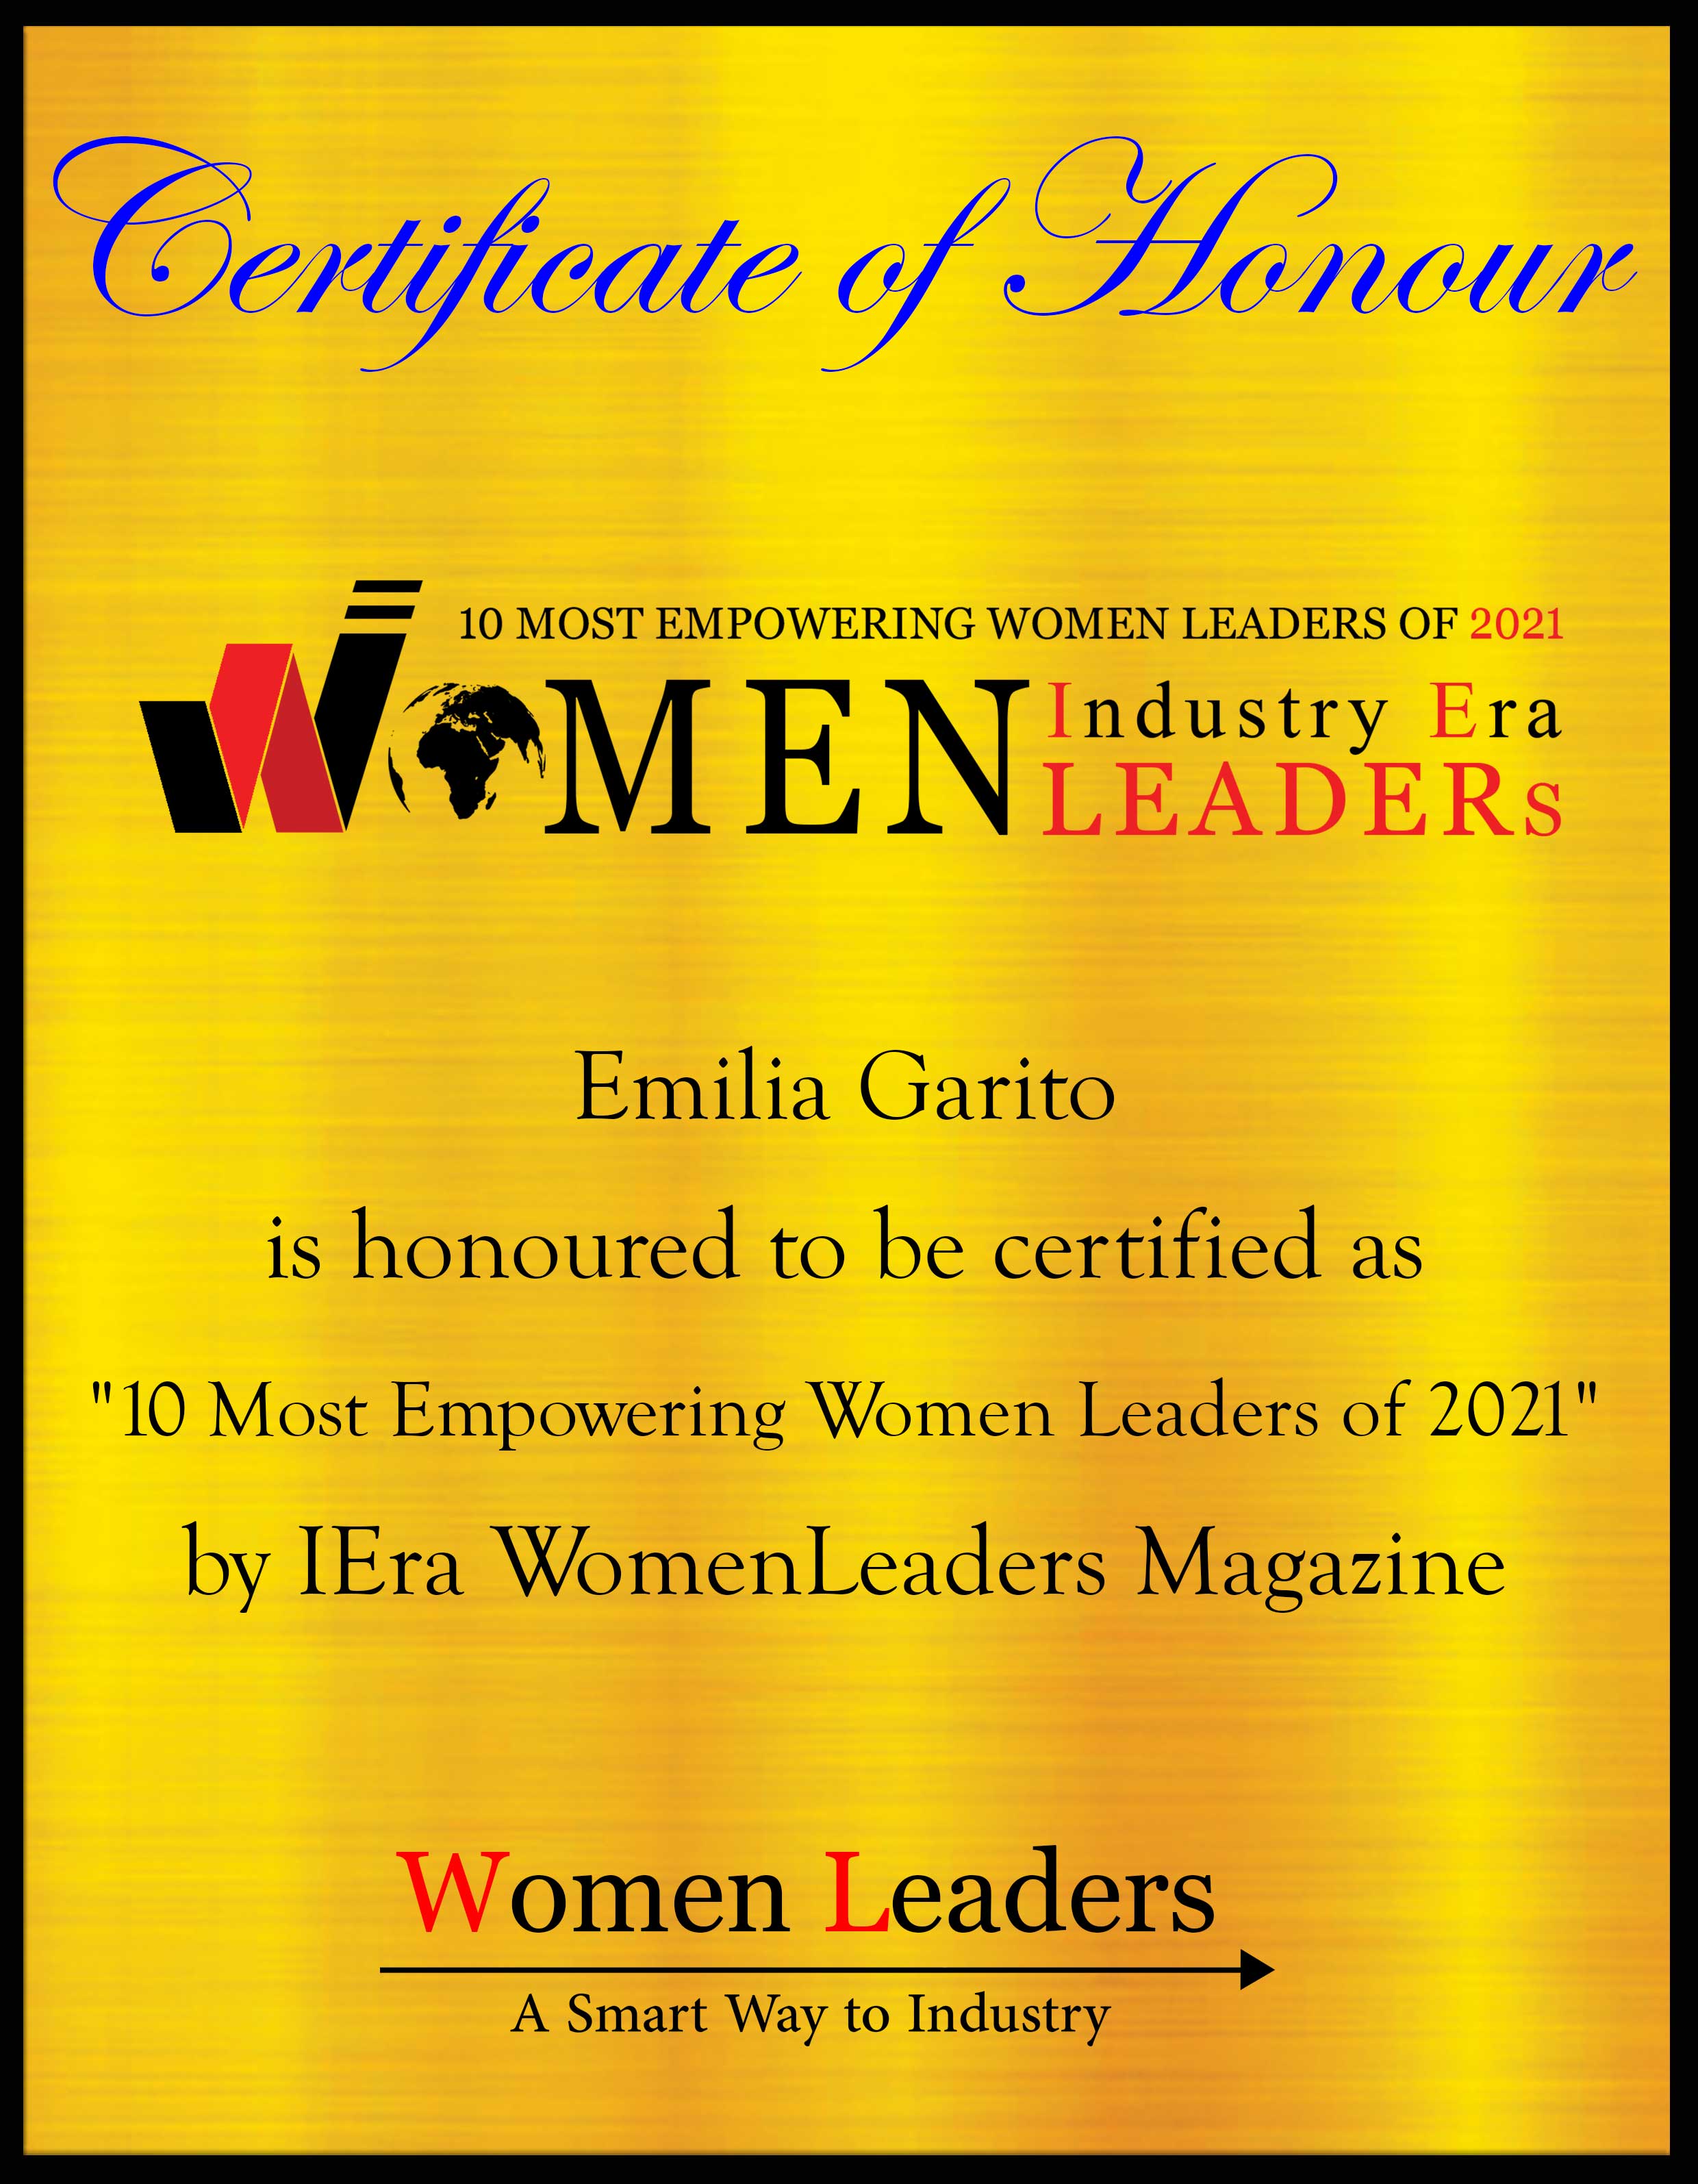 Emilia Garito, Chief Executive Officer of Quantum Leap Ip, Most Empowering Women Leaders of 2021